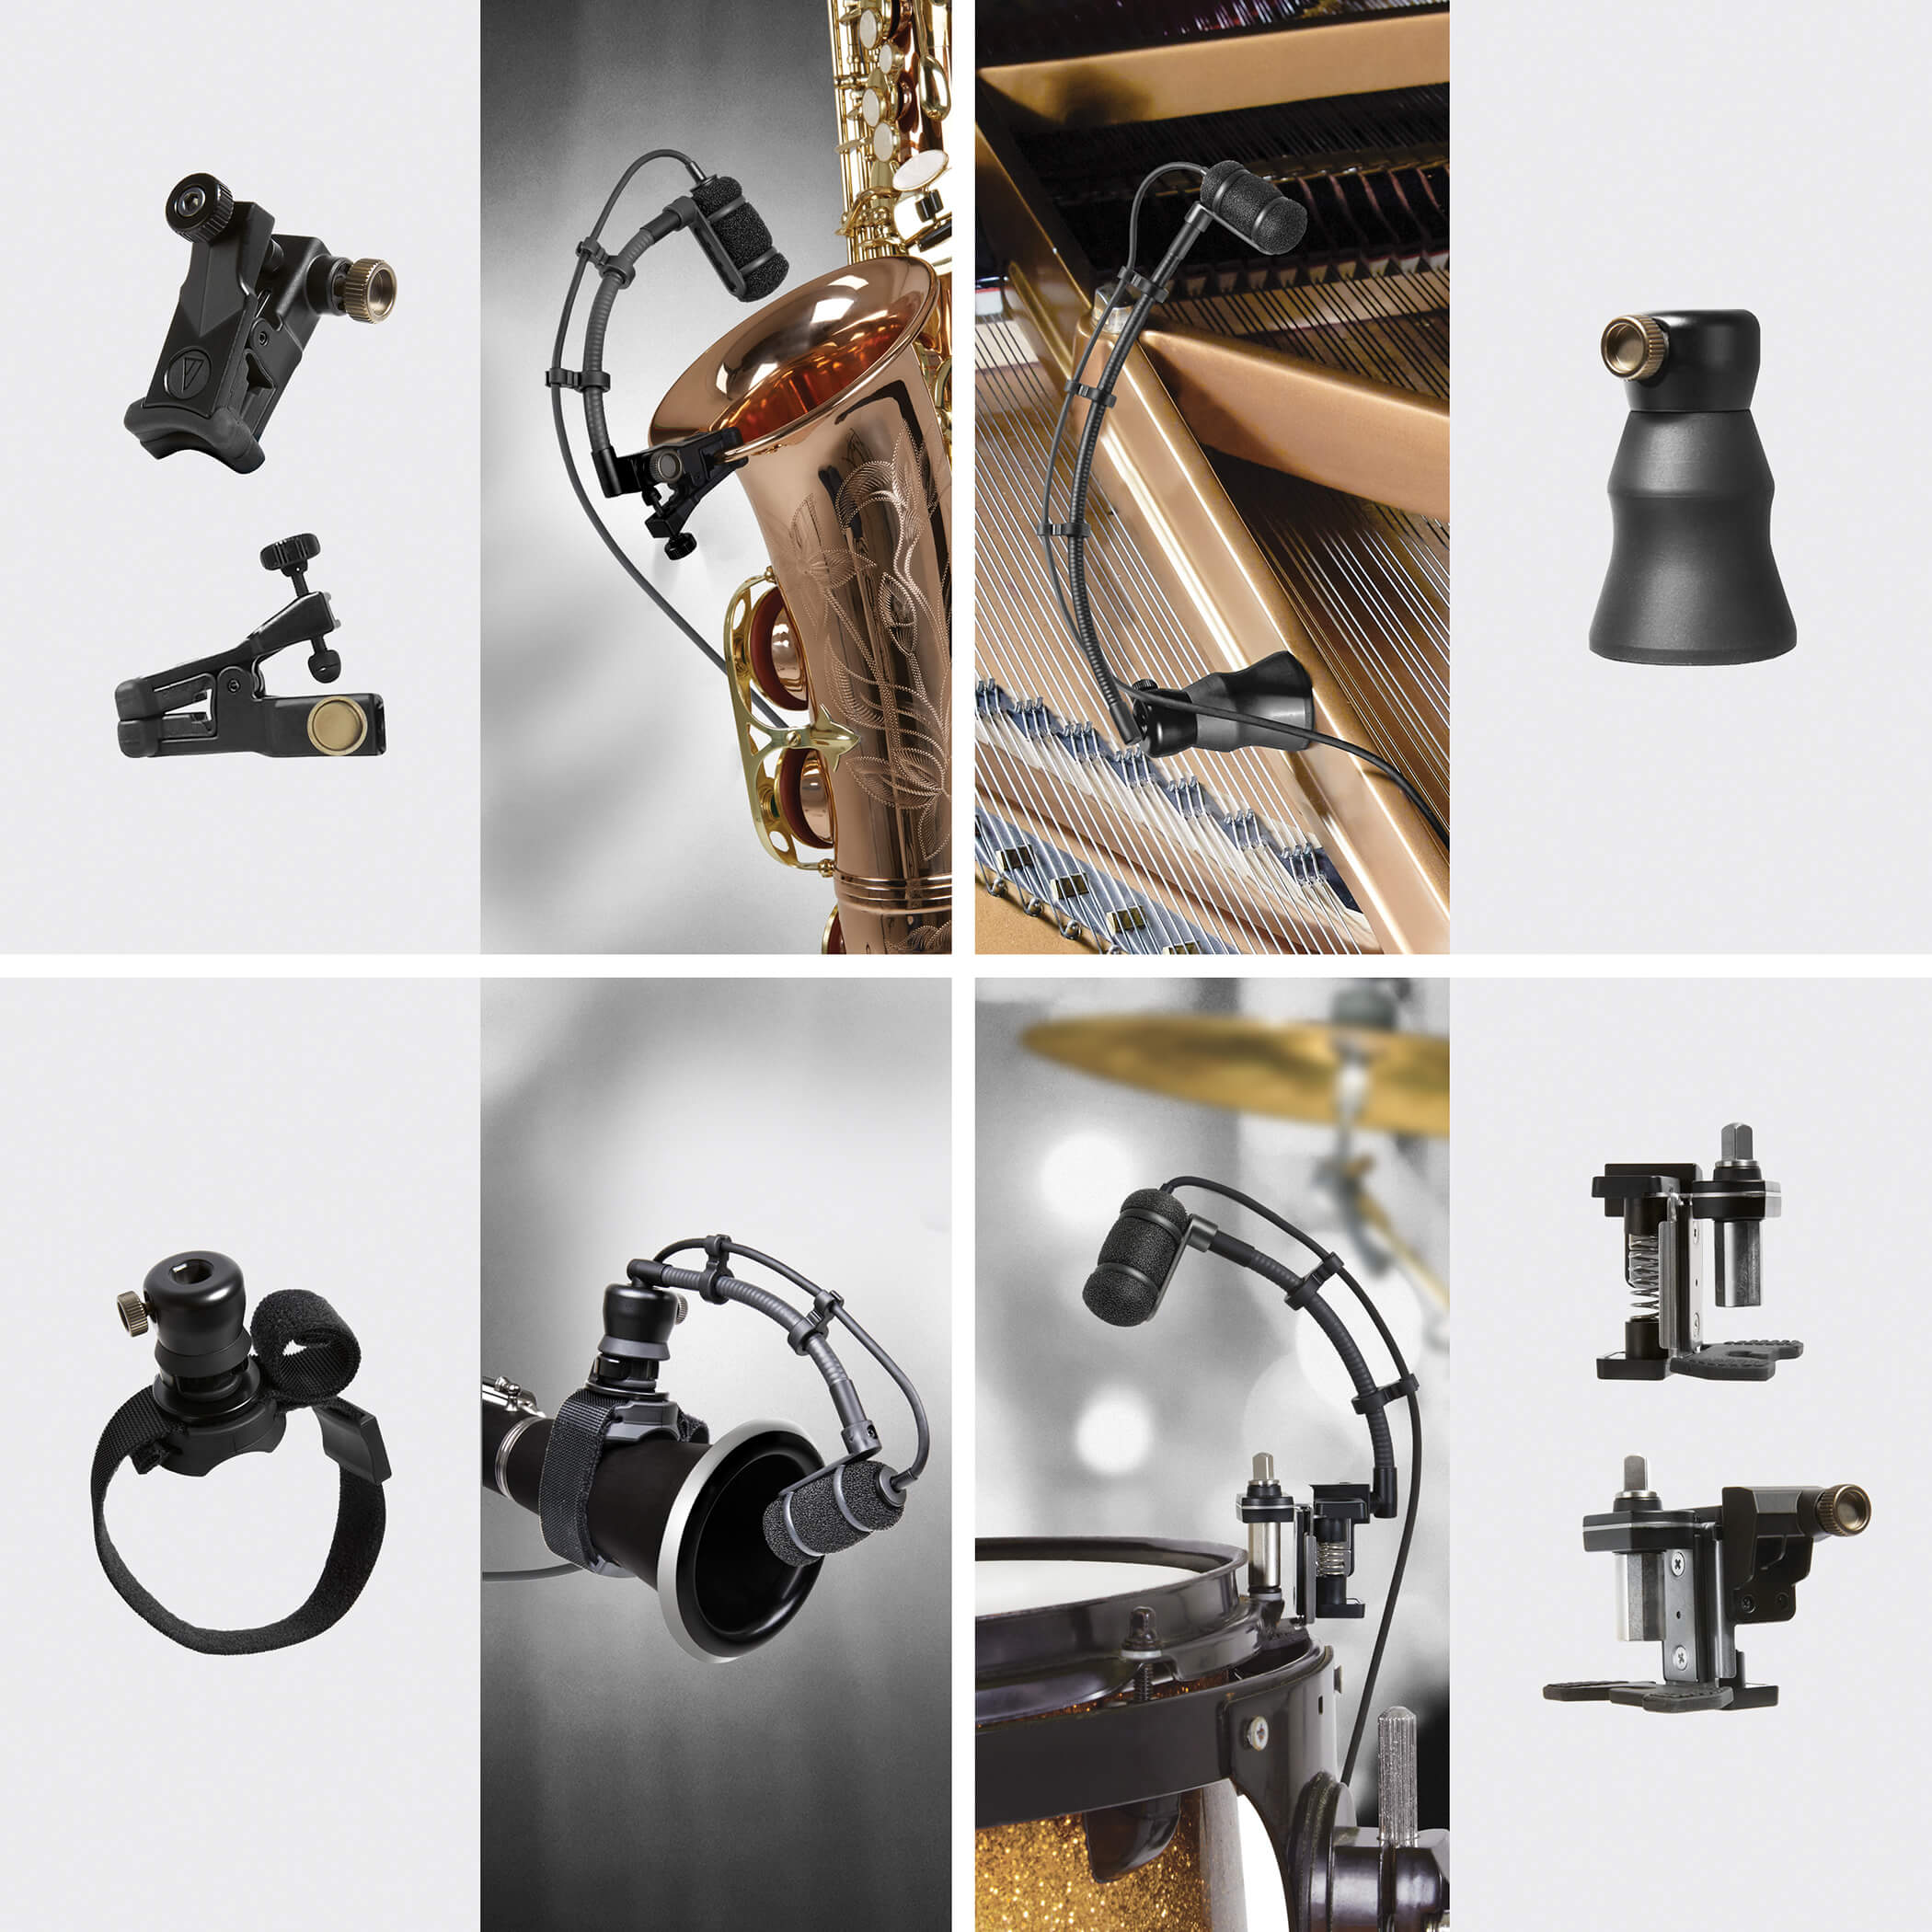 ENTER TO WIN Audio-Technica ATM350a Microphones and Mounting Systems